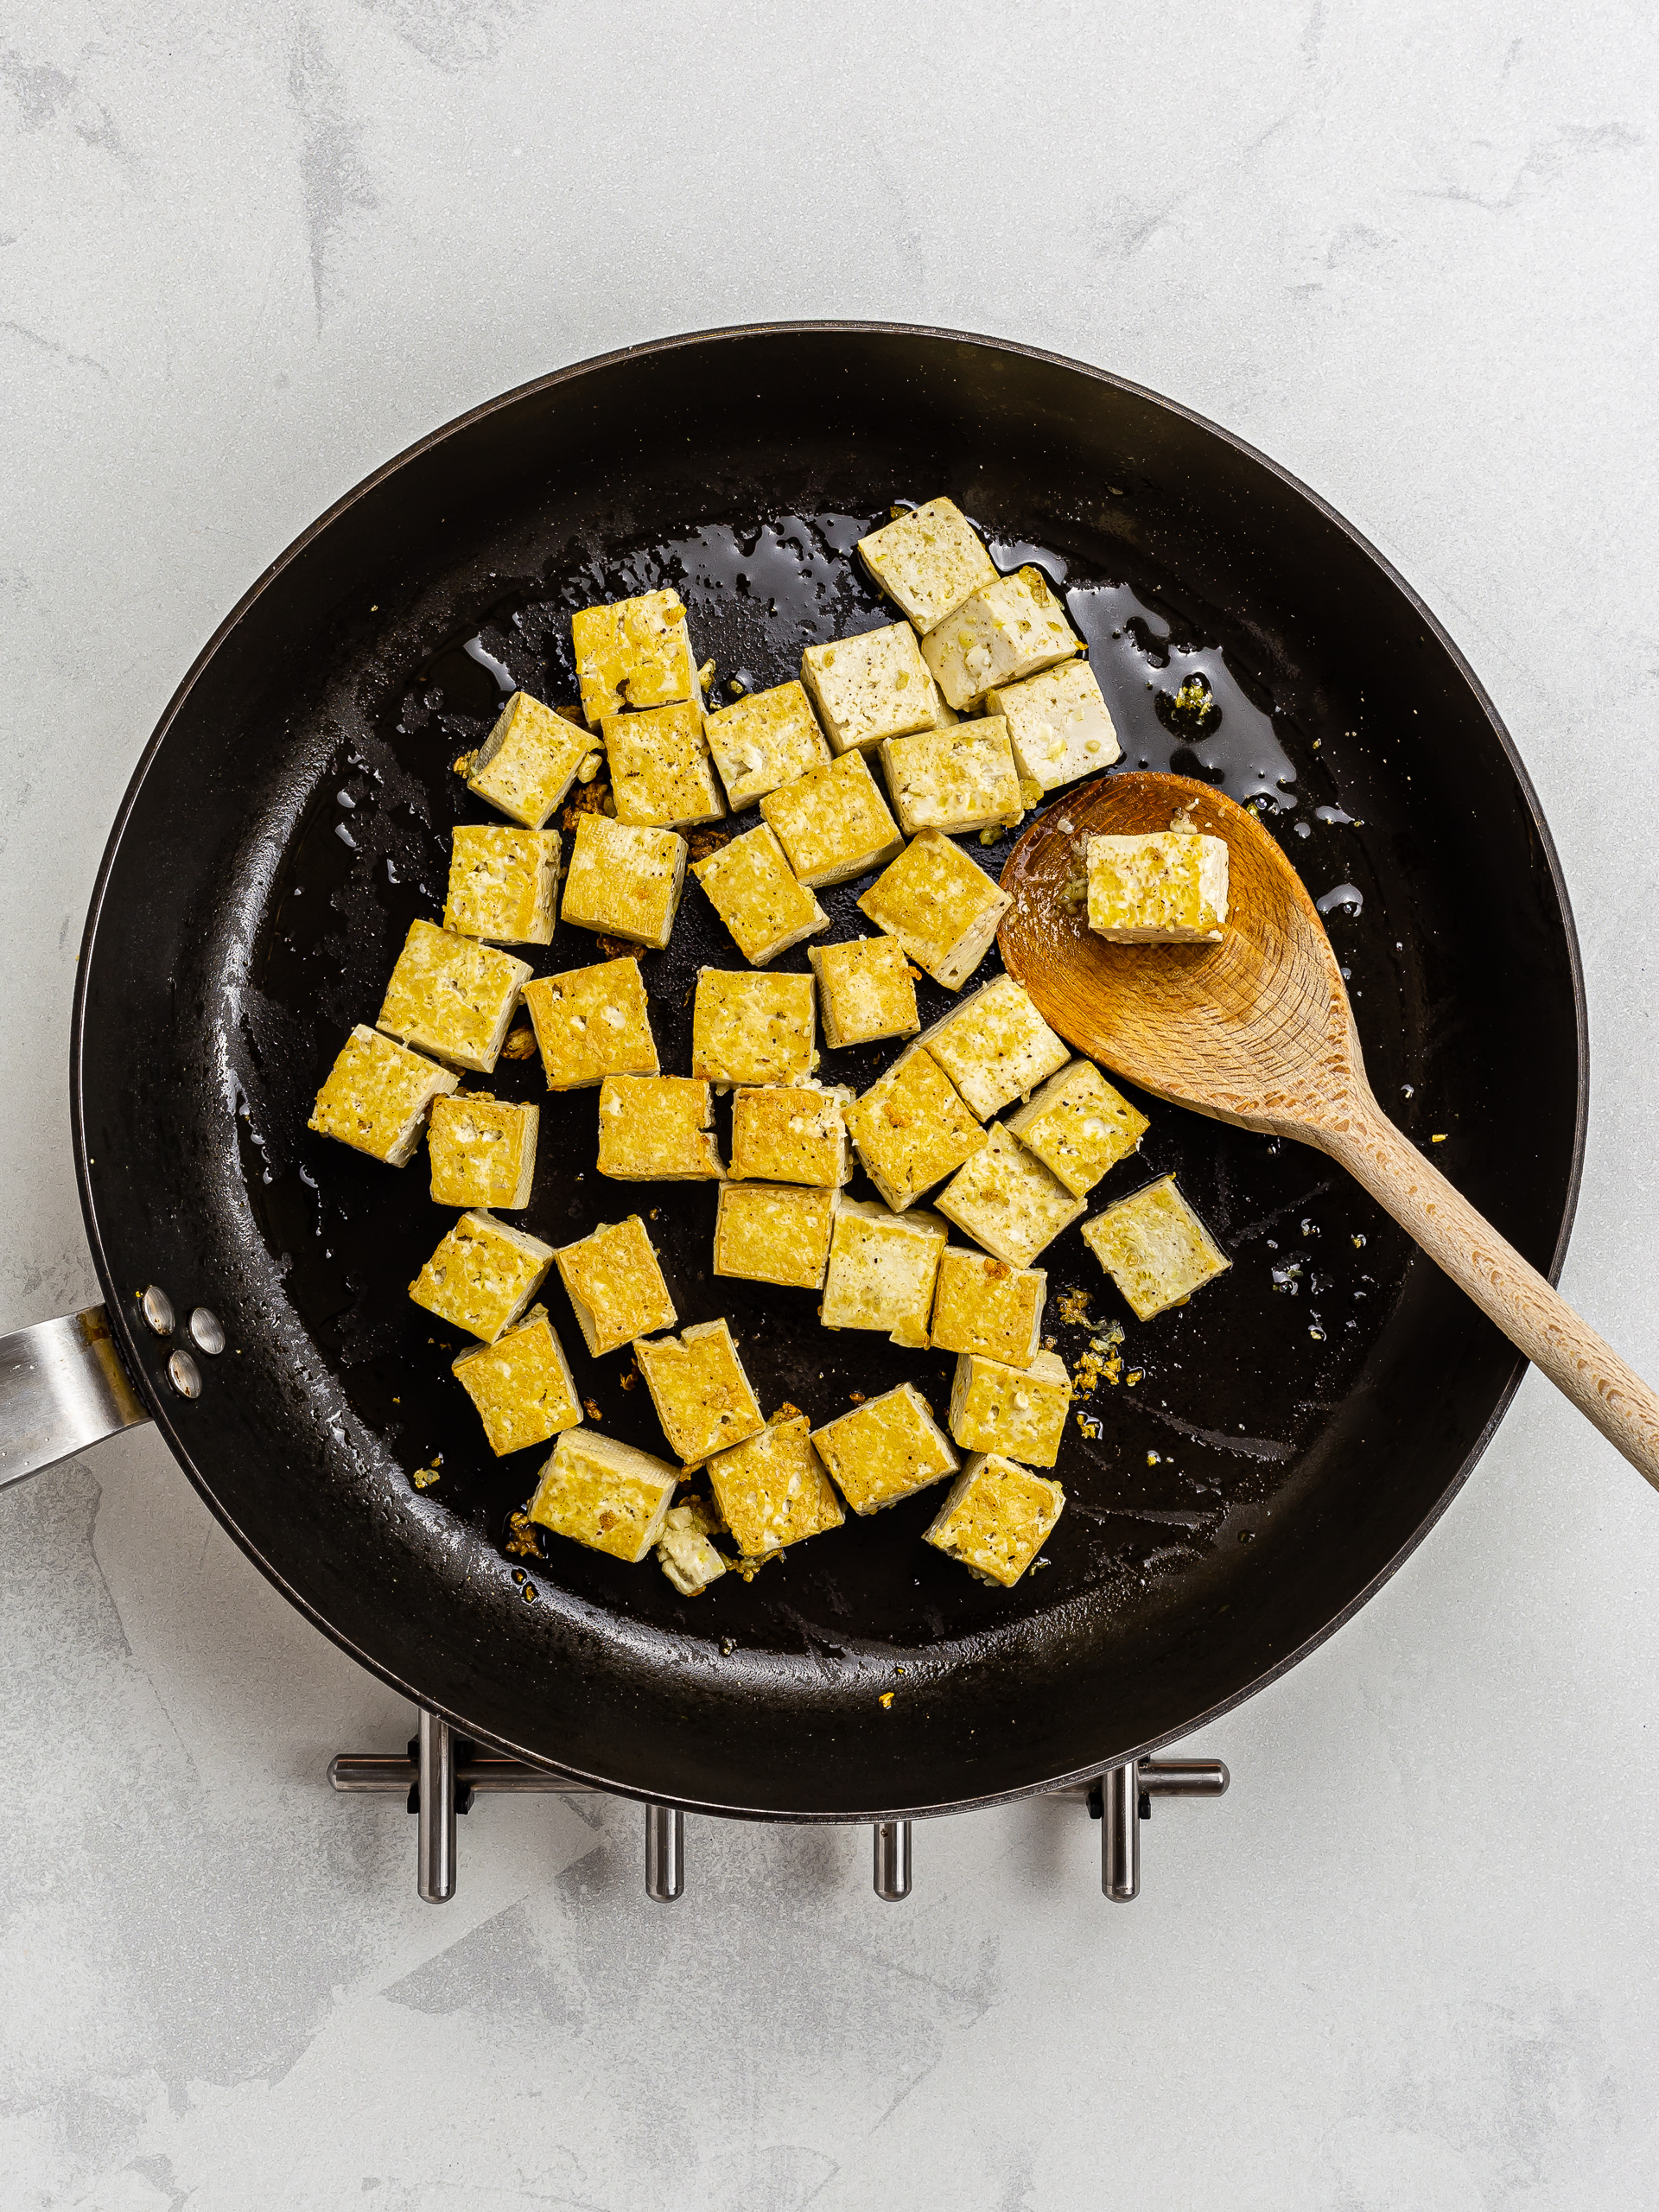 sizzled tofu in a skillet